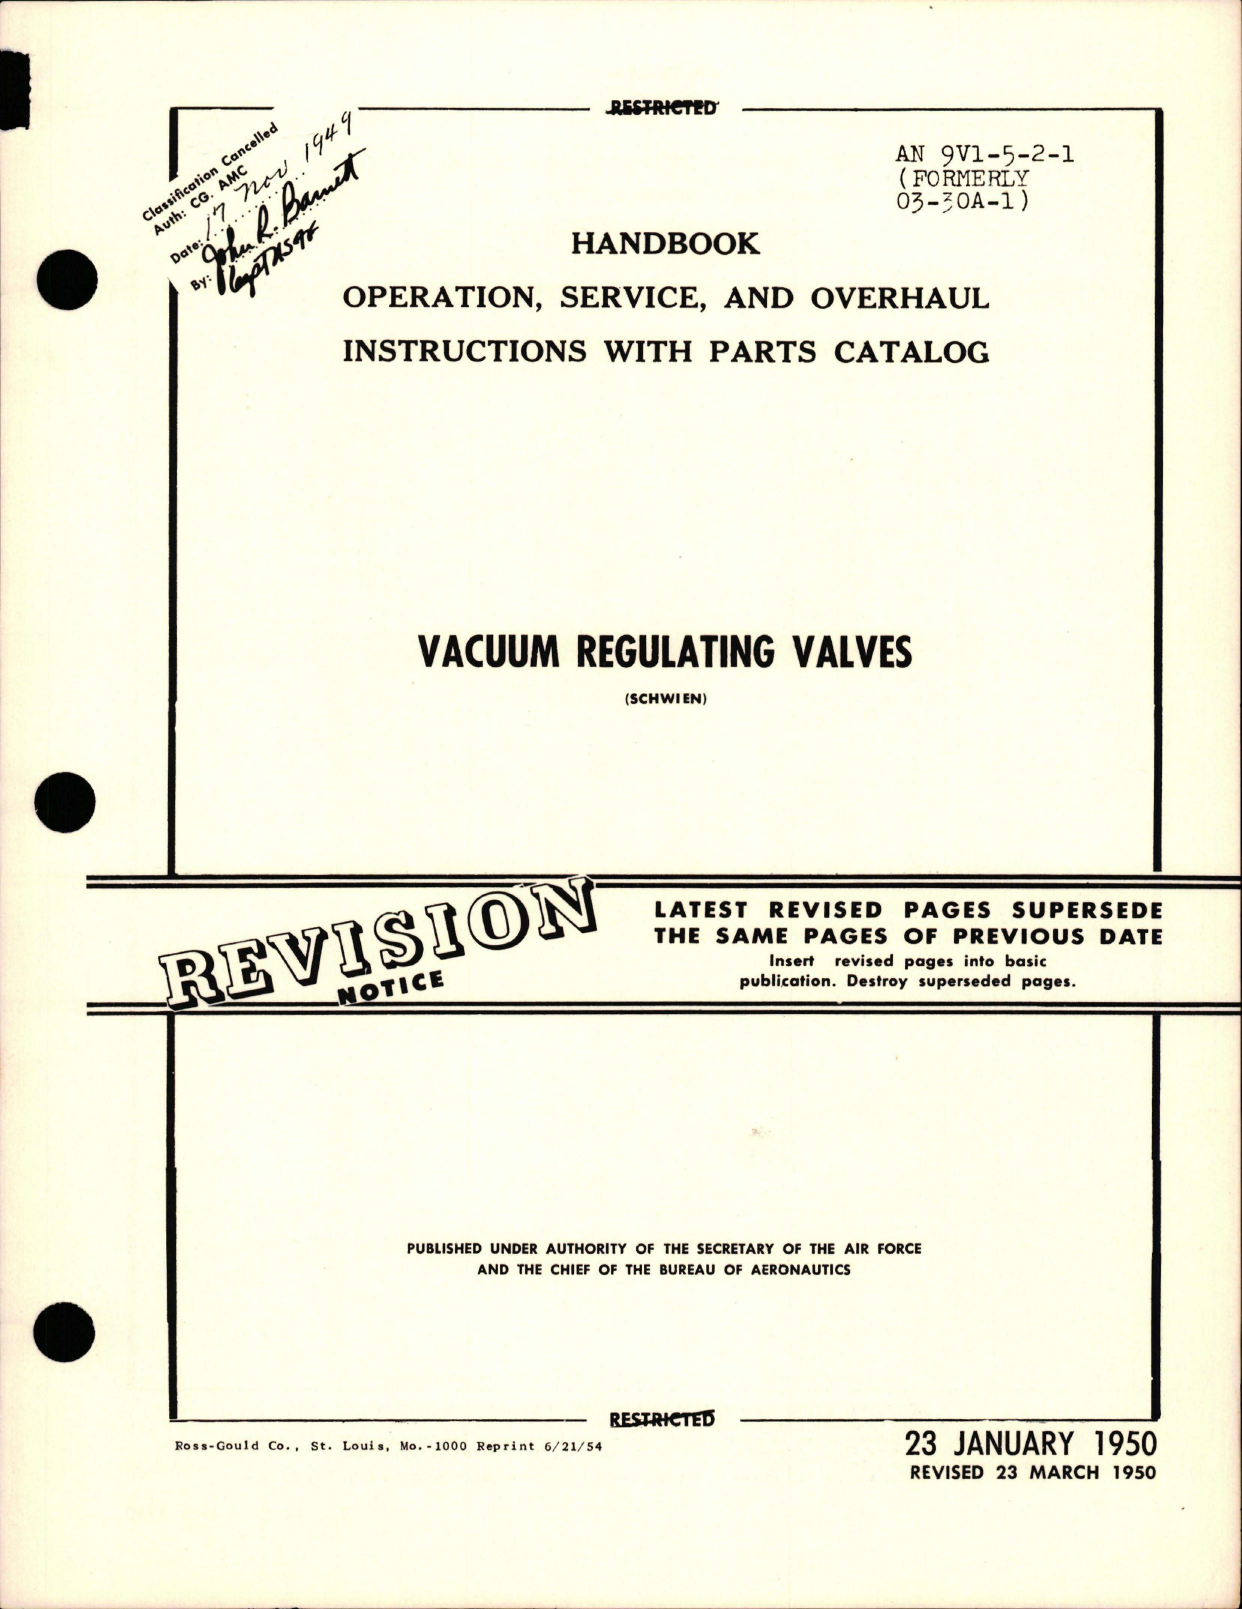 Sample page 1 from AirCorps Library document: Operation, Service and Overhaul Instructions with Parts Catalog for Vacuum Regulating Valves